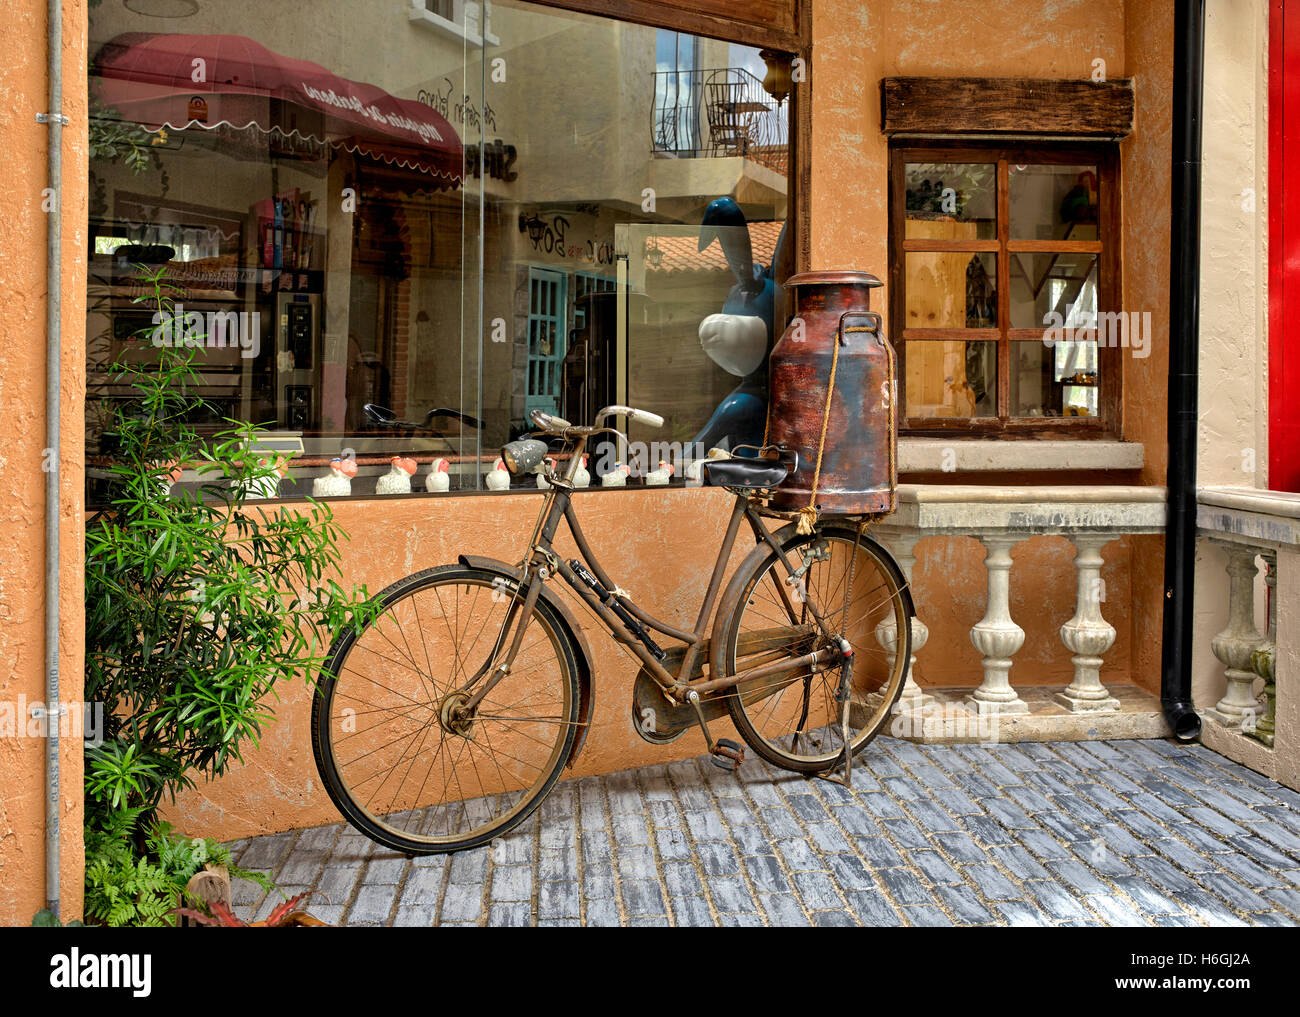 French boutique cafe and an Old bicycle with milk churn parked outside France Europe Stock Photo